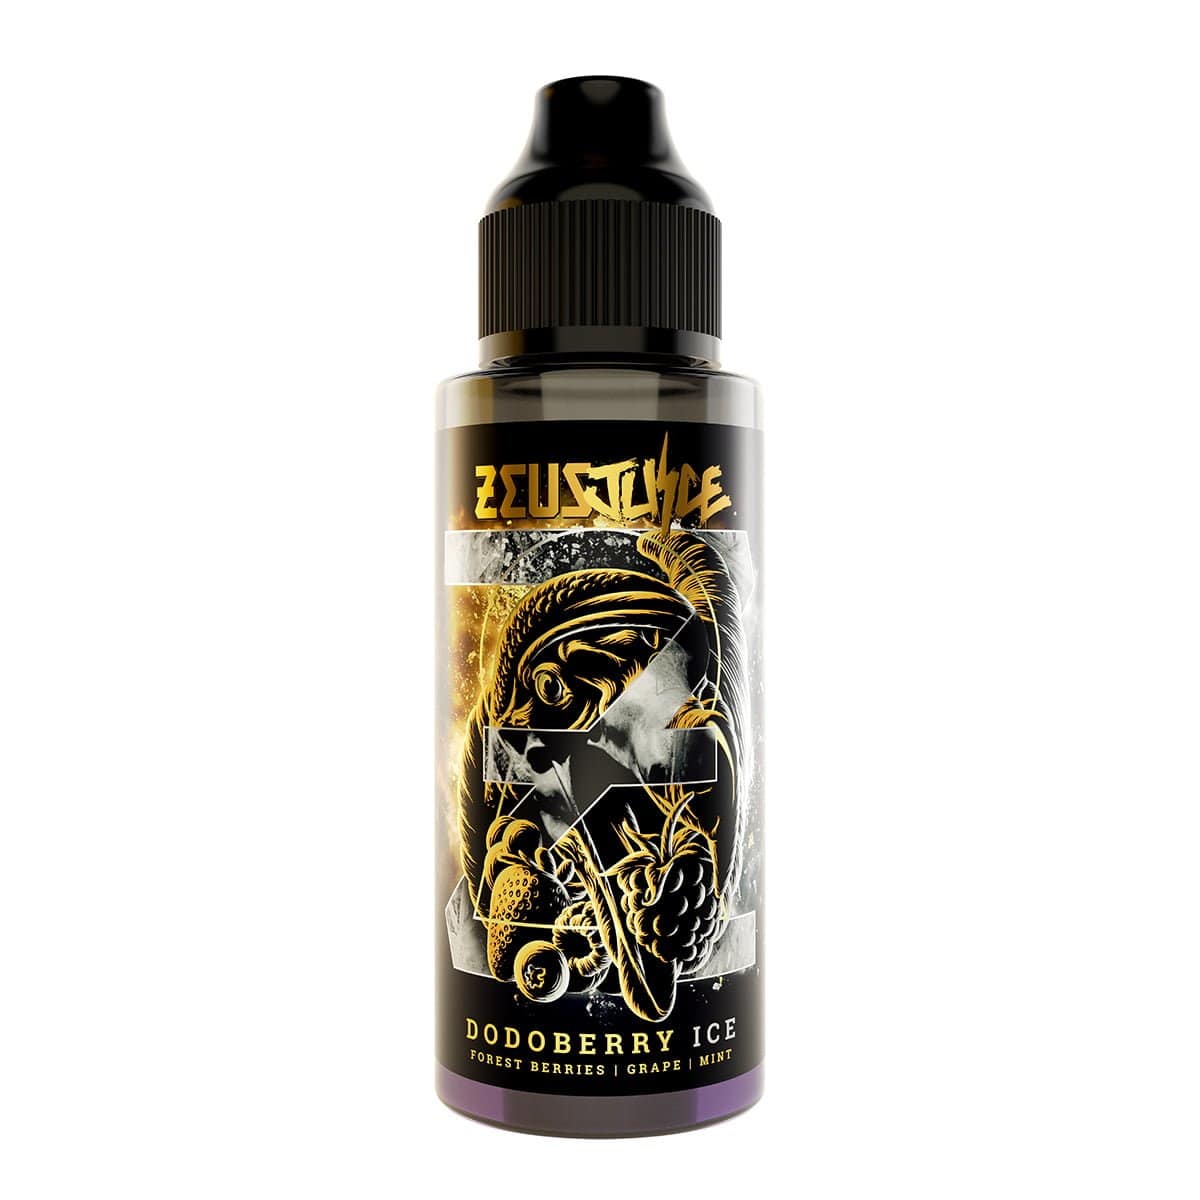 Load image into Gallery viewer, Dodoberry ICE by Zeus Juice - 100ml Short Fill E-Liquid
